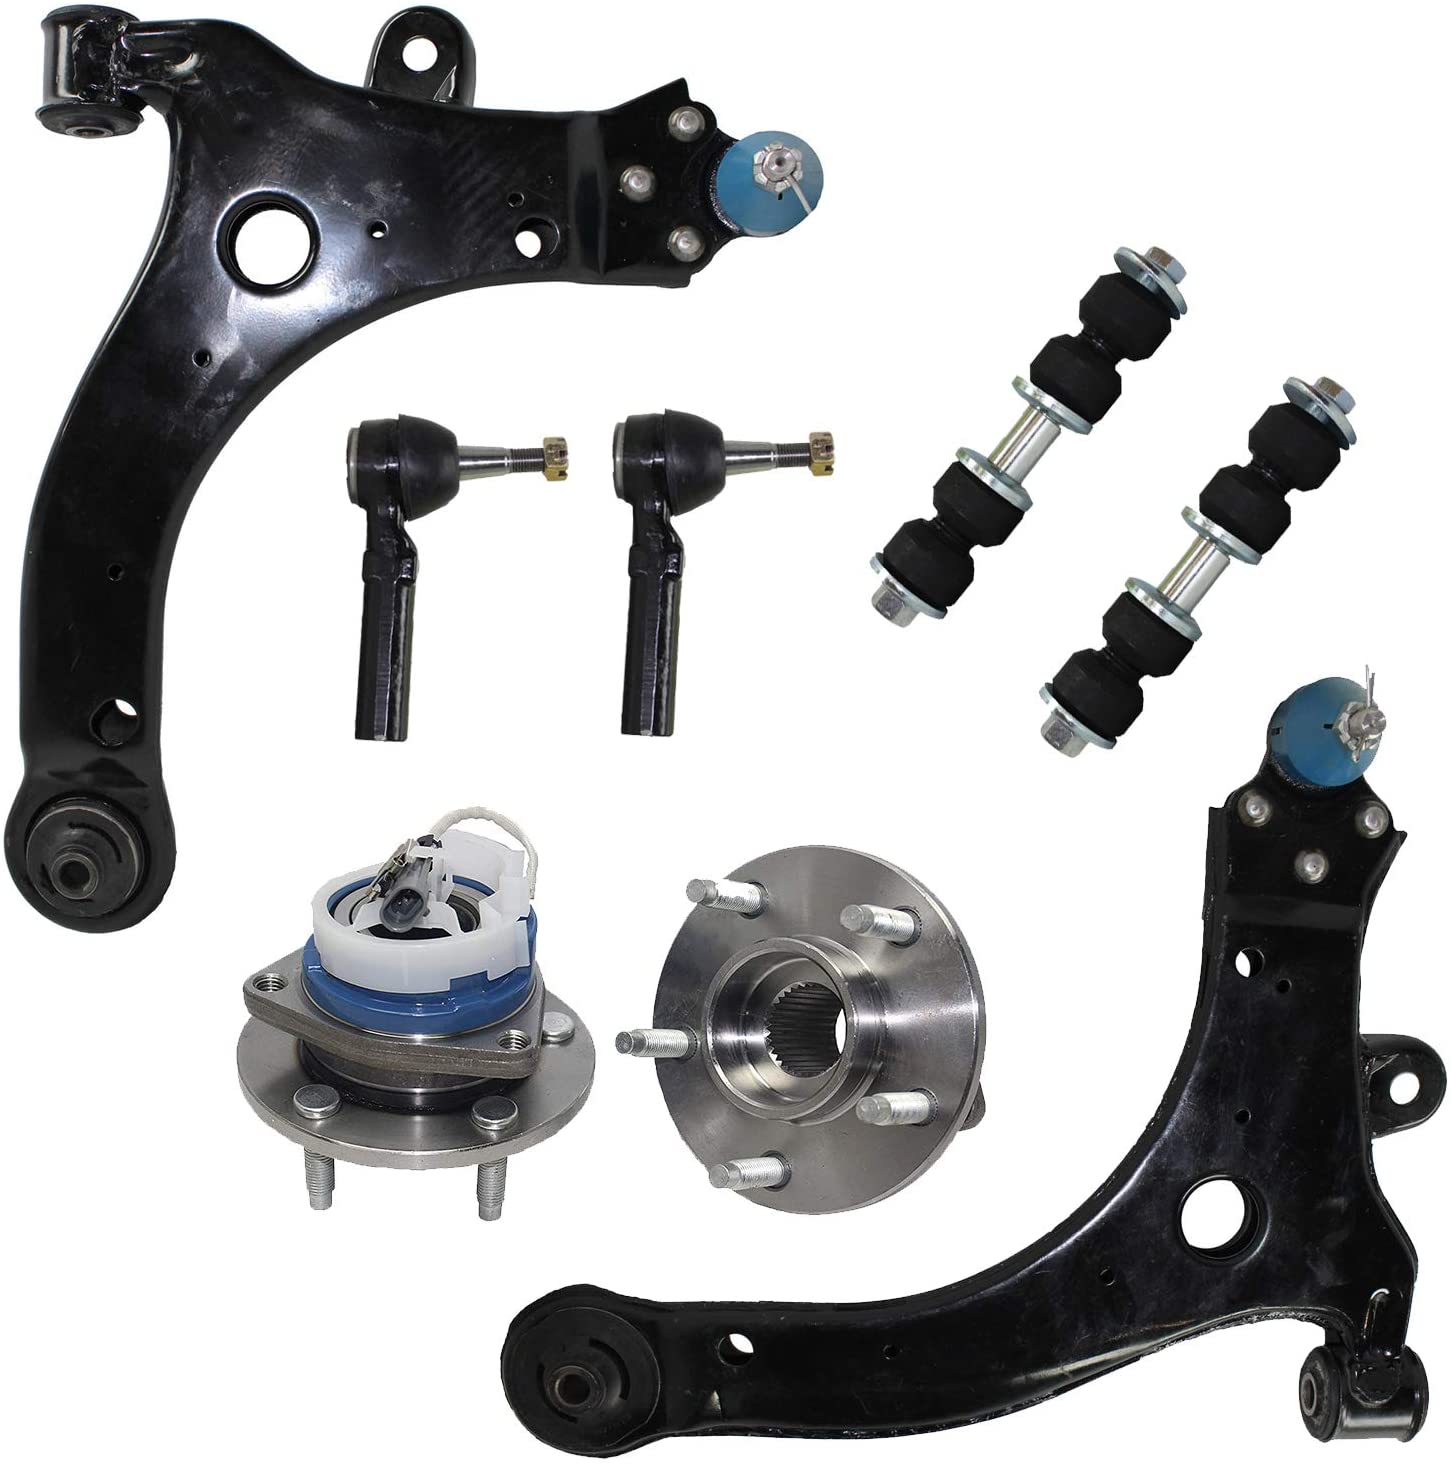 Detroit Axle - 8pc Front Lower Control Arms w/Ball joints, Wheel Hub Bearings, Sway Bar and Outer Tie Rods Kit for 1997-2005 Buick Regal/Century - [2000-2009 Chevy Impala Exc. FE4]- See Fitment